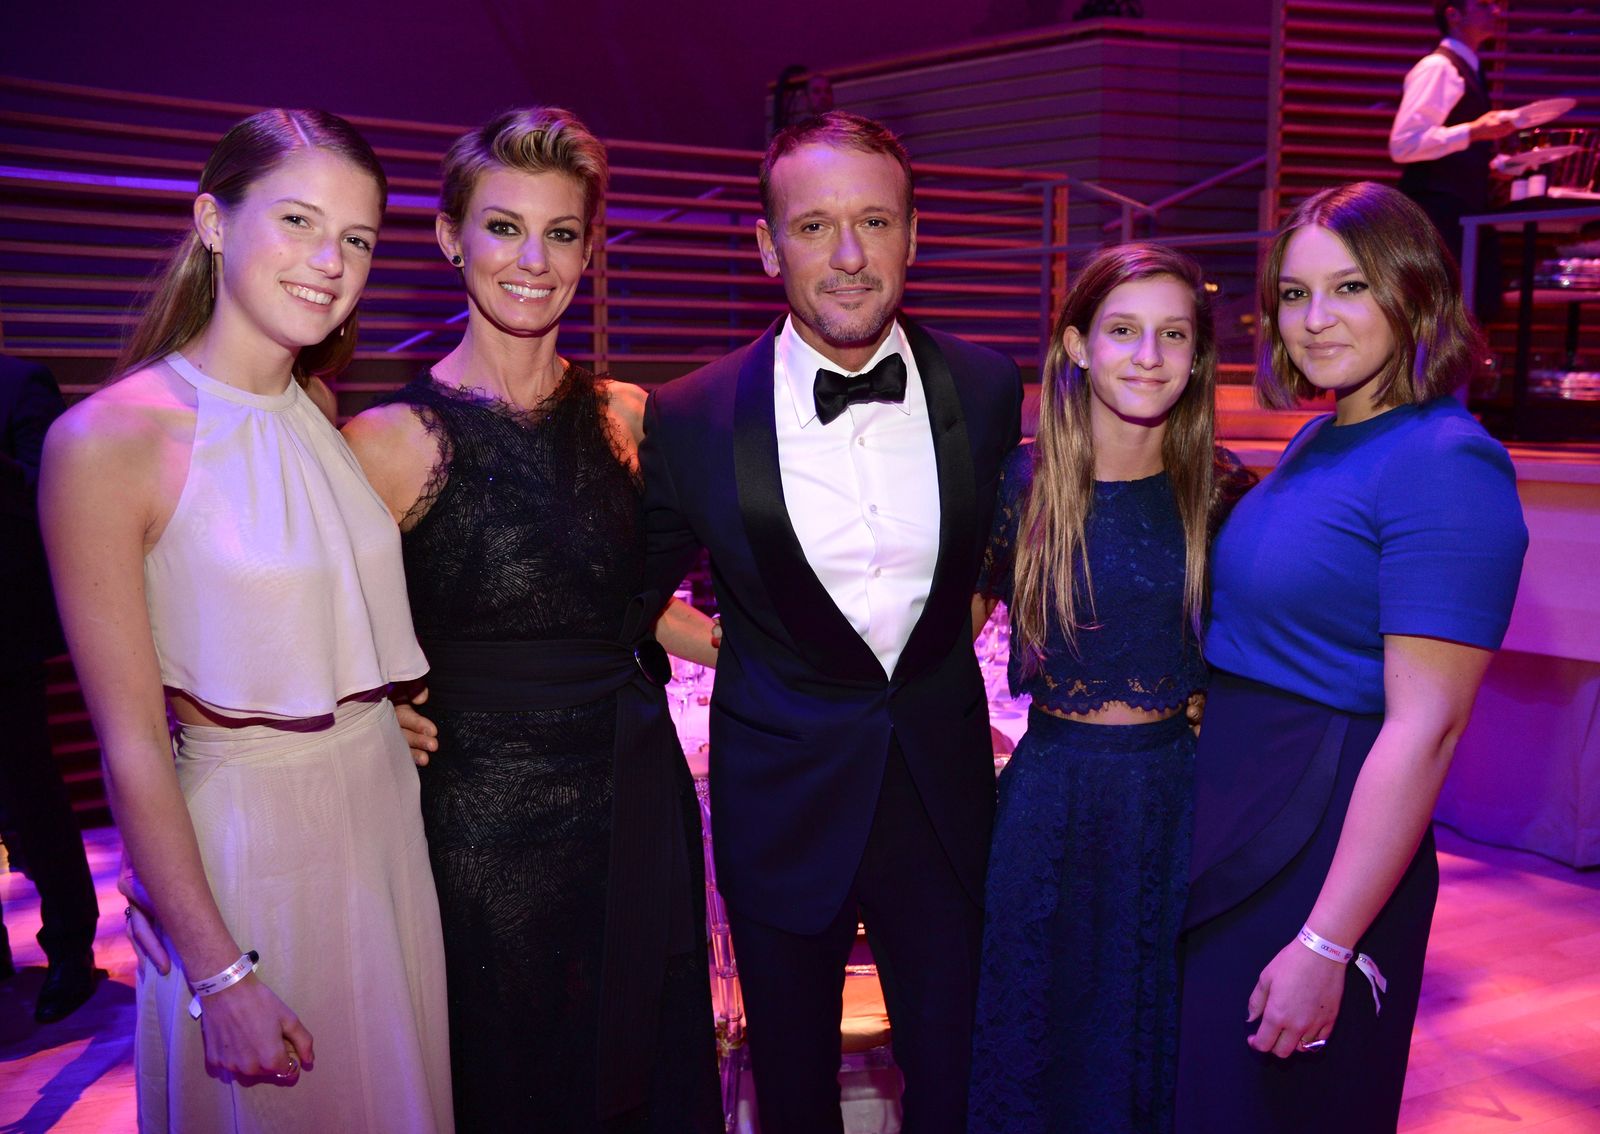 Gracie McGraw, Faith Hill, Tim McGraw, Audrey McGraw and Maggie McGraw attend TIME 100 Gala on April 21, 2015. | Photo: Getty Images